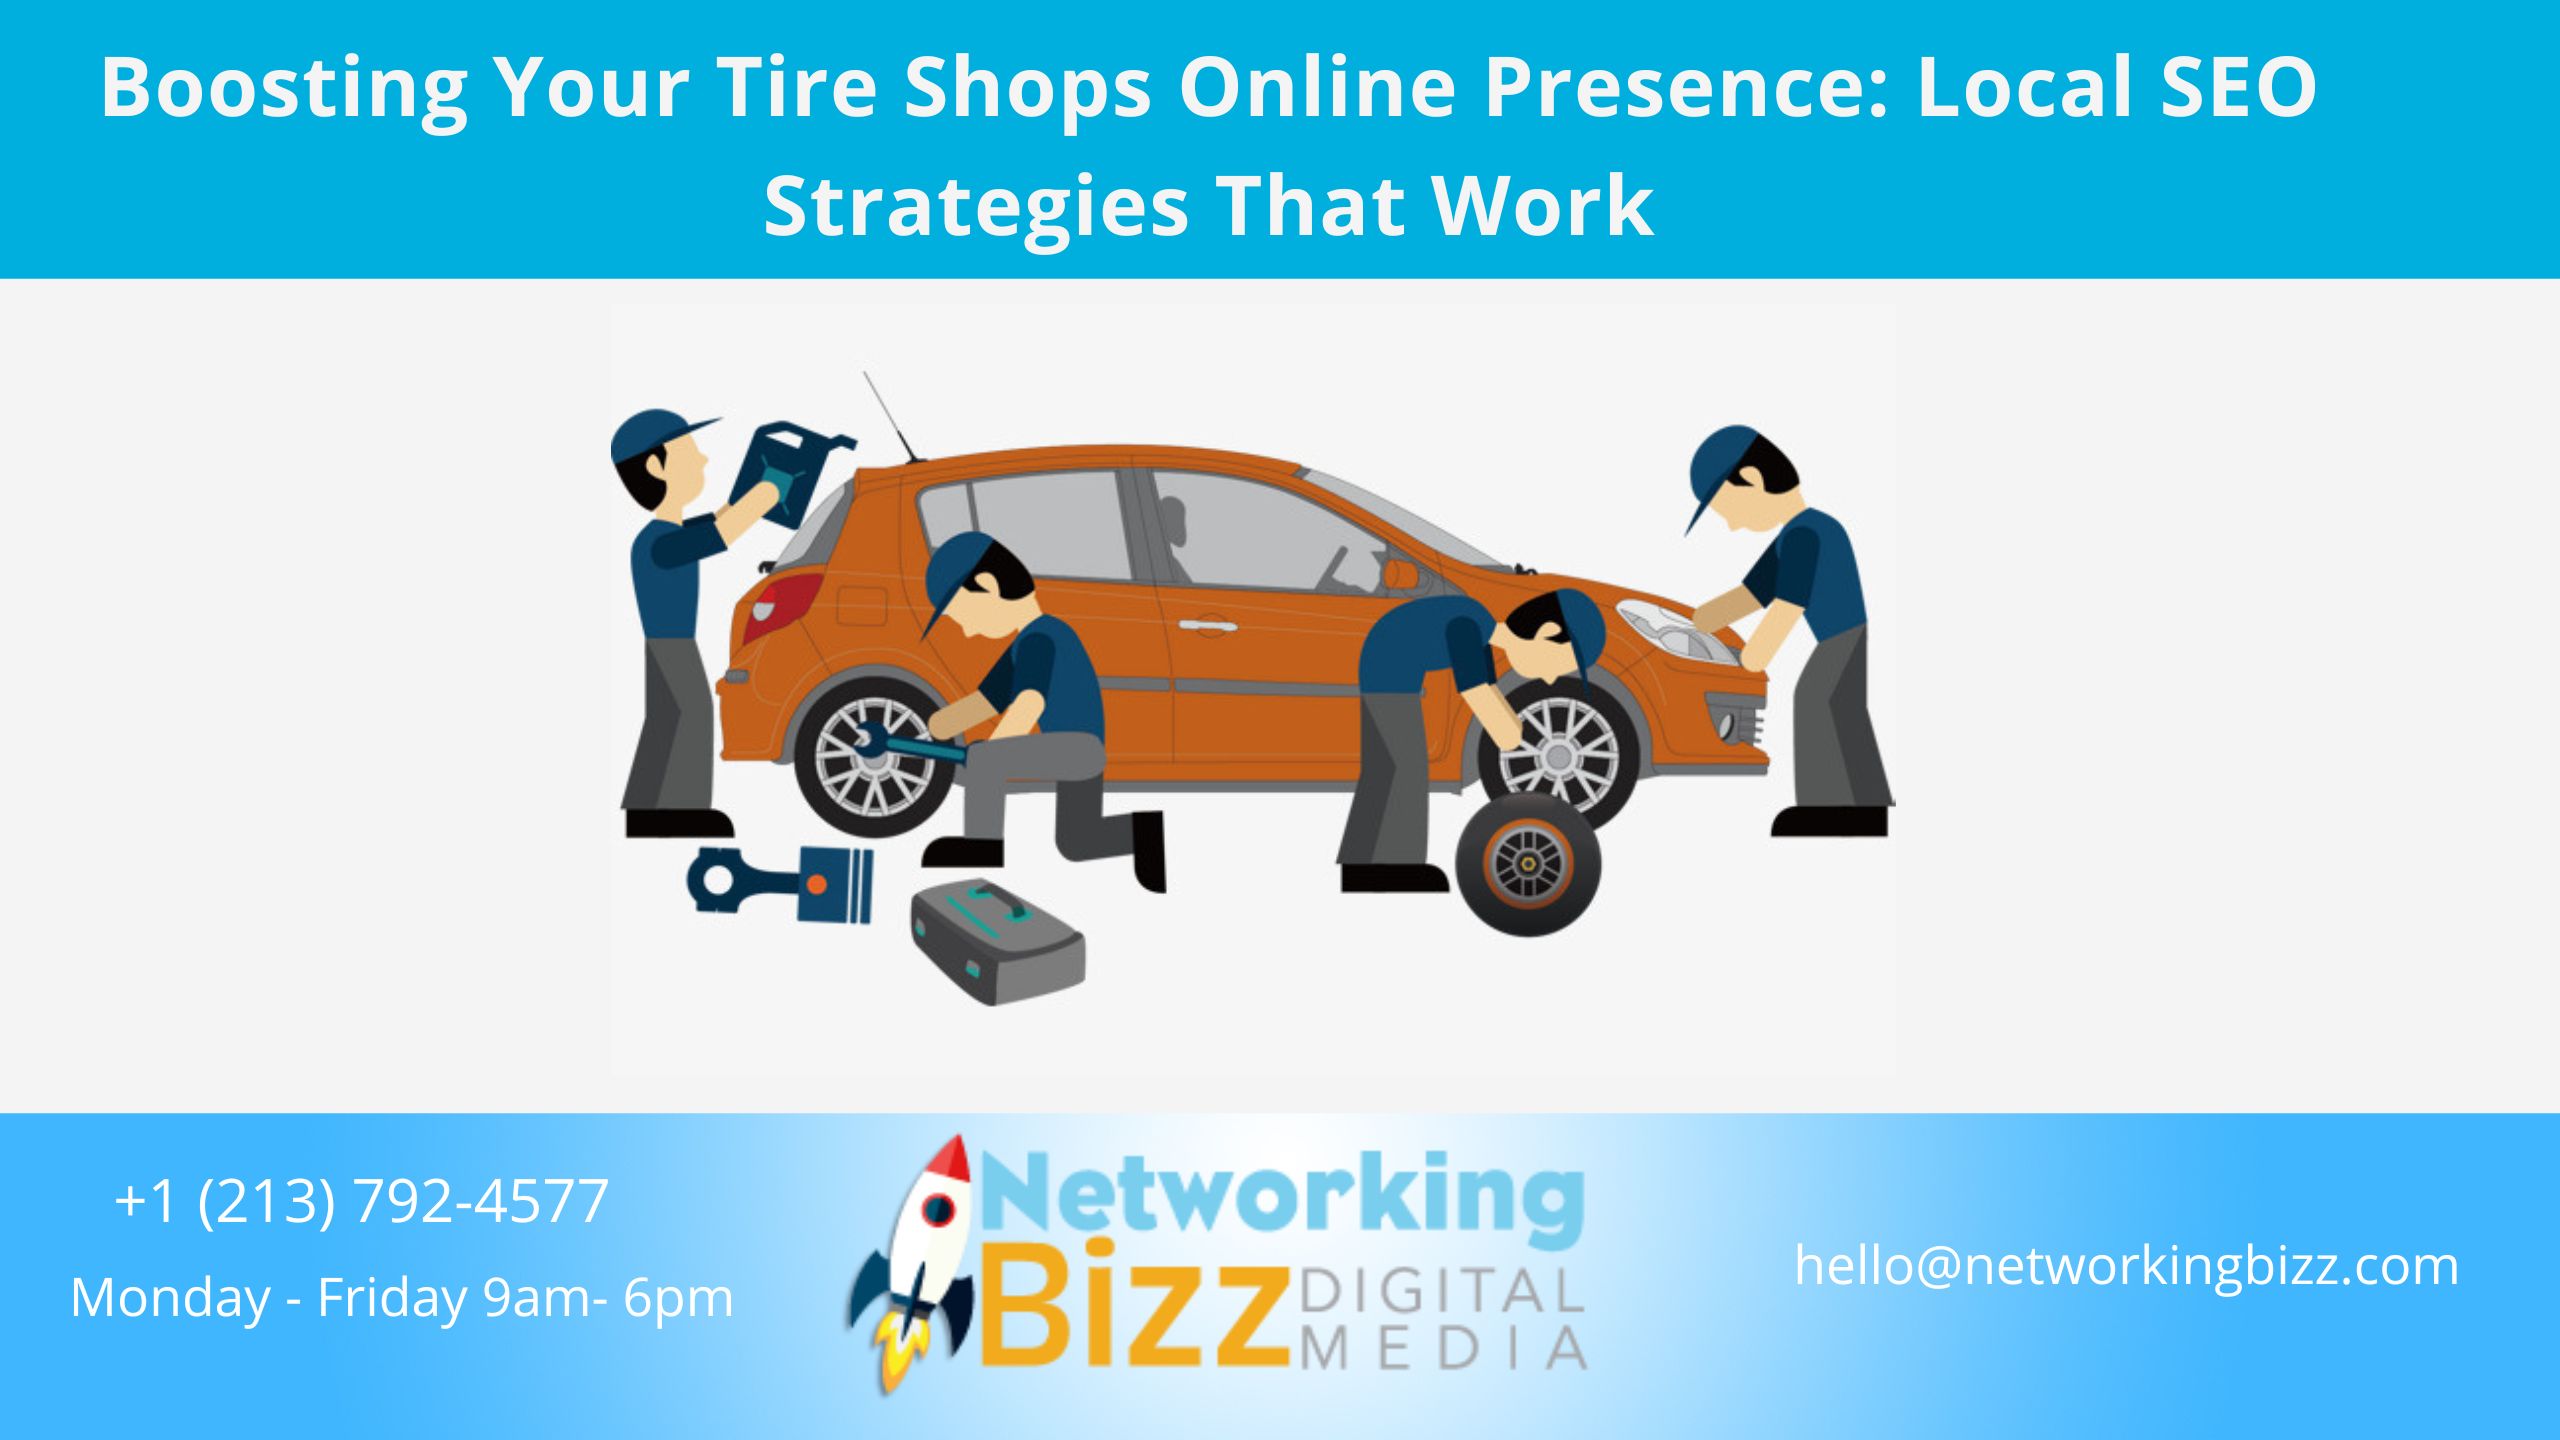 Boosting Your Tire Shops Online Presence: Local SEO Strategies That Work